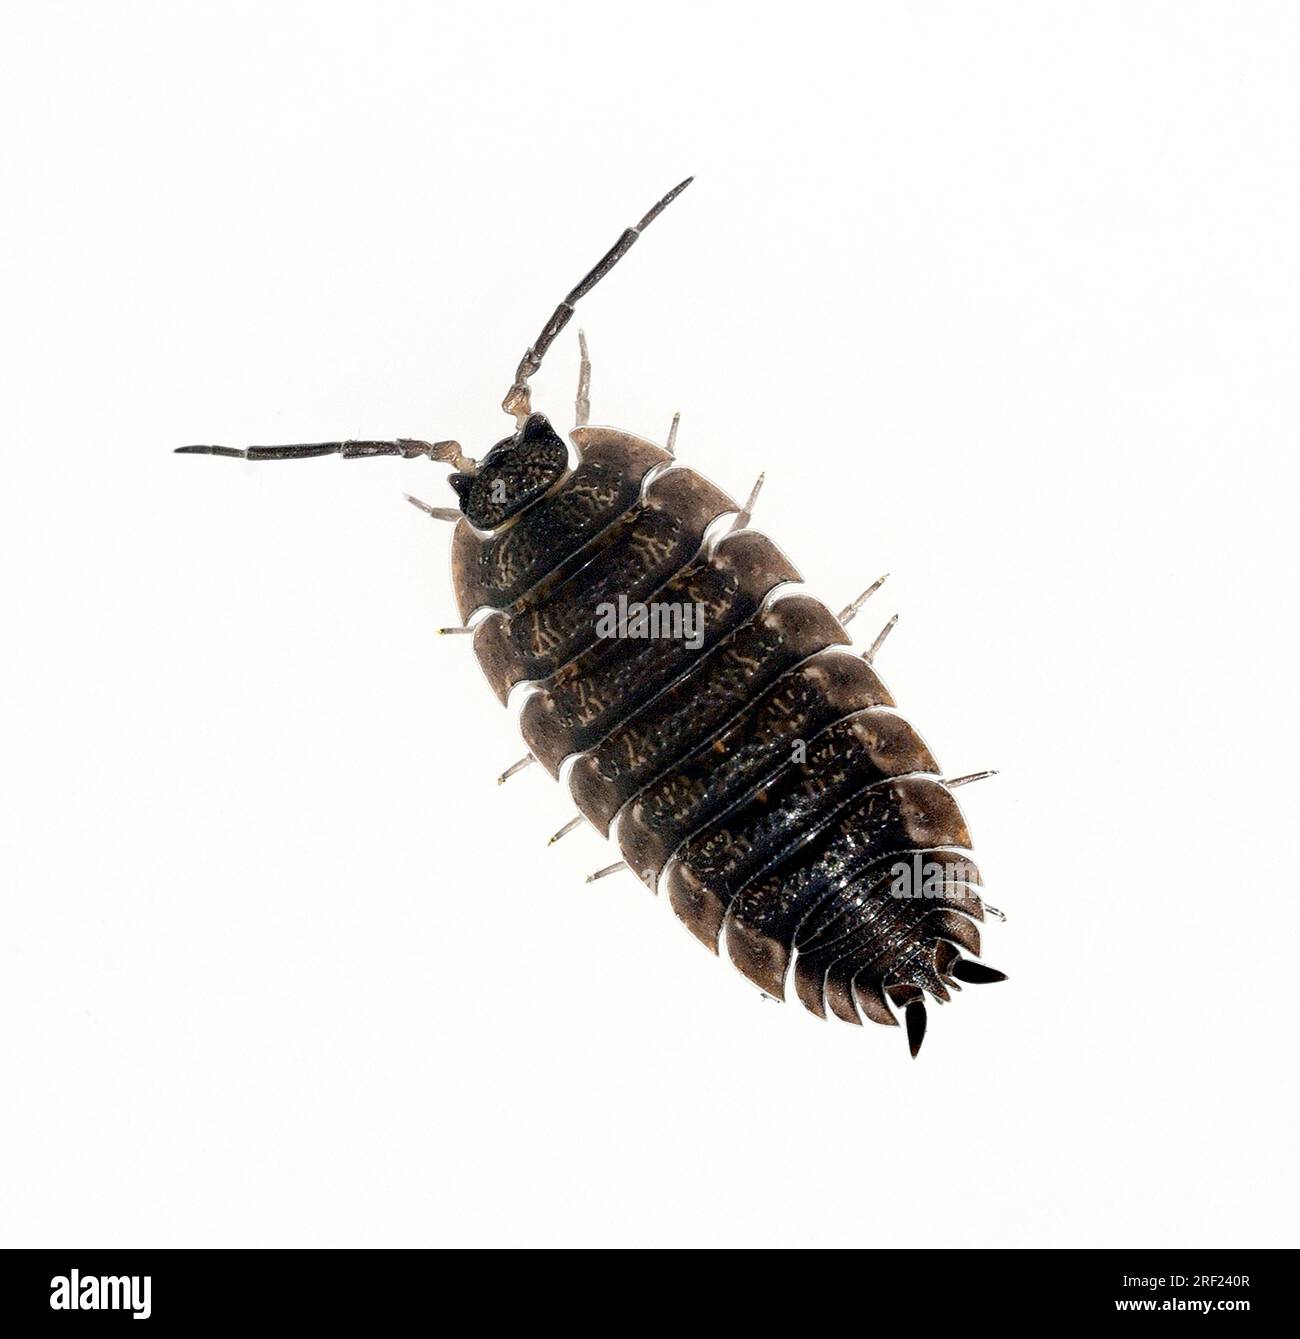 Woodlice, Porcellio scaber, is a very useful species of woodlice, as the animals process dead plant material into humus. Stock Photo